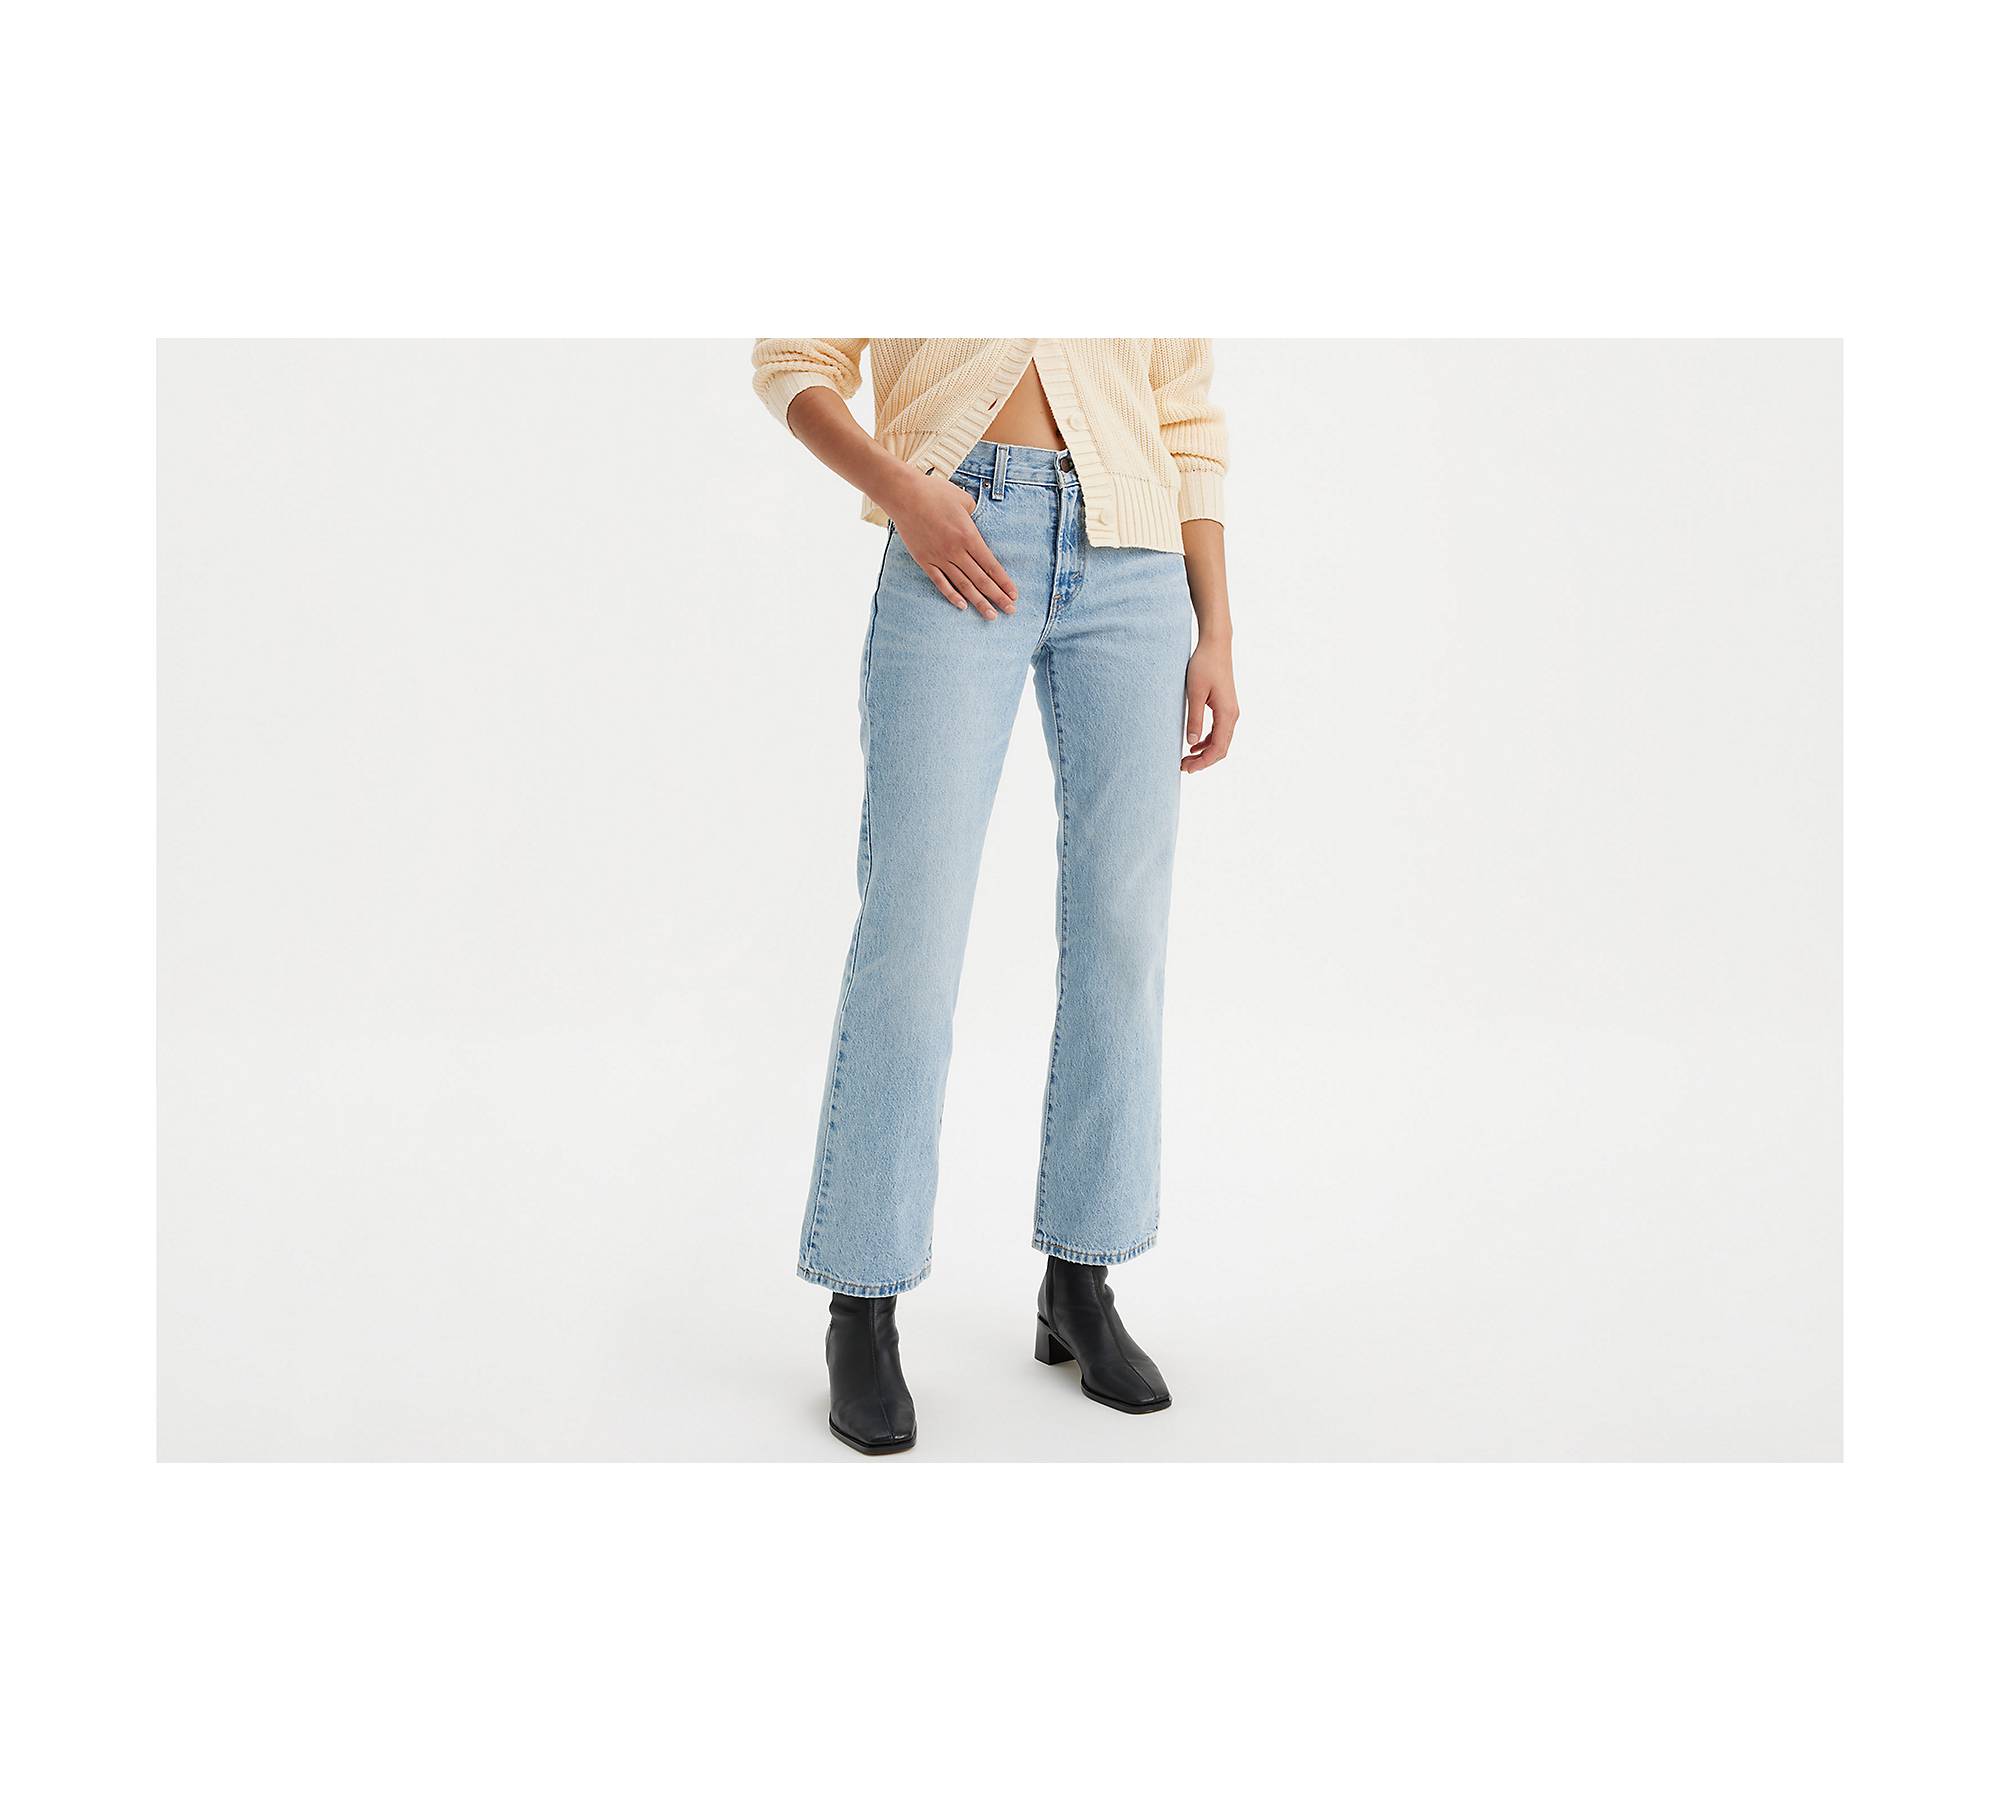 Middy Ankle Bootcut Women's Jeans - Light Wash